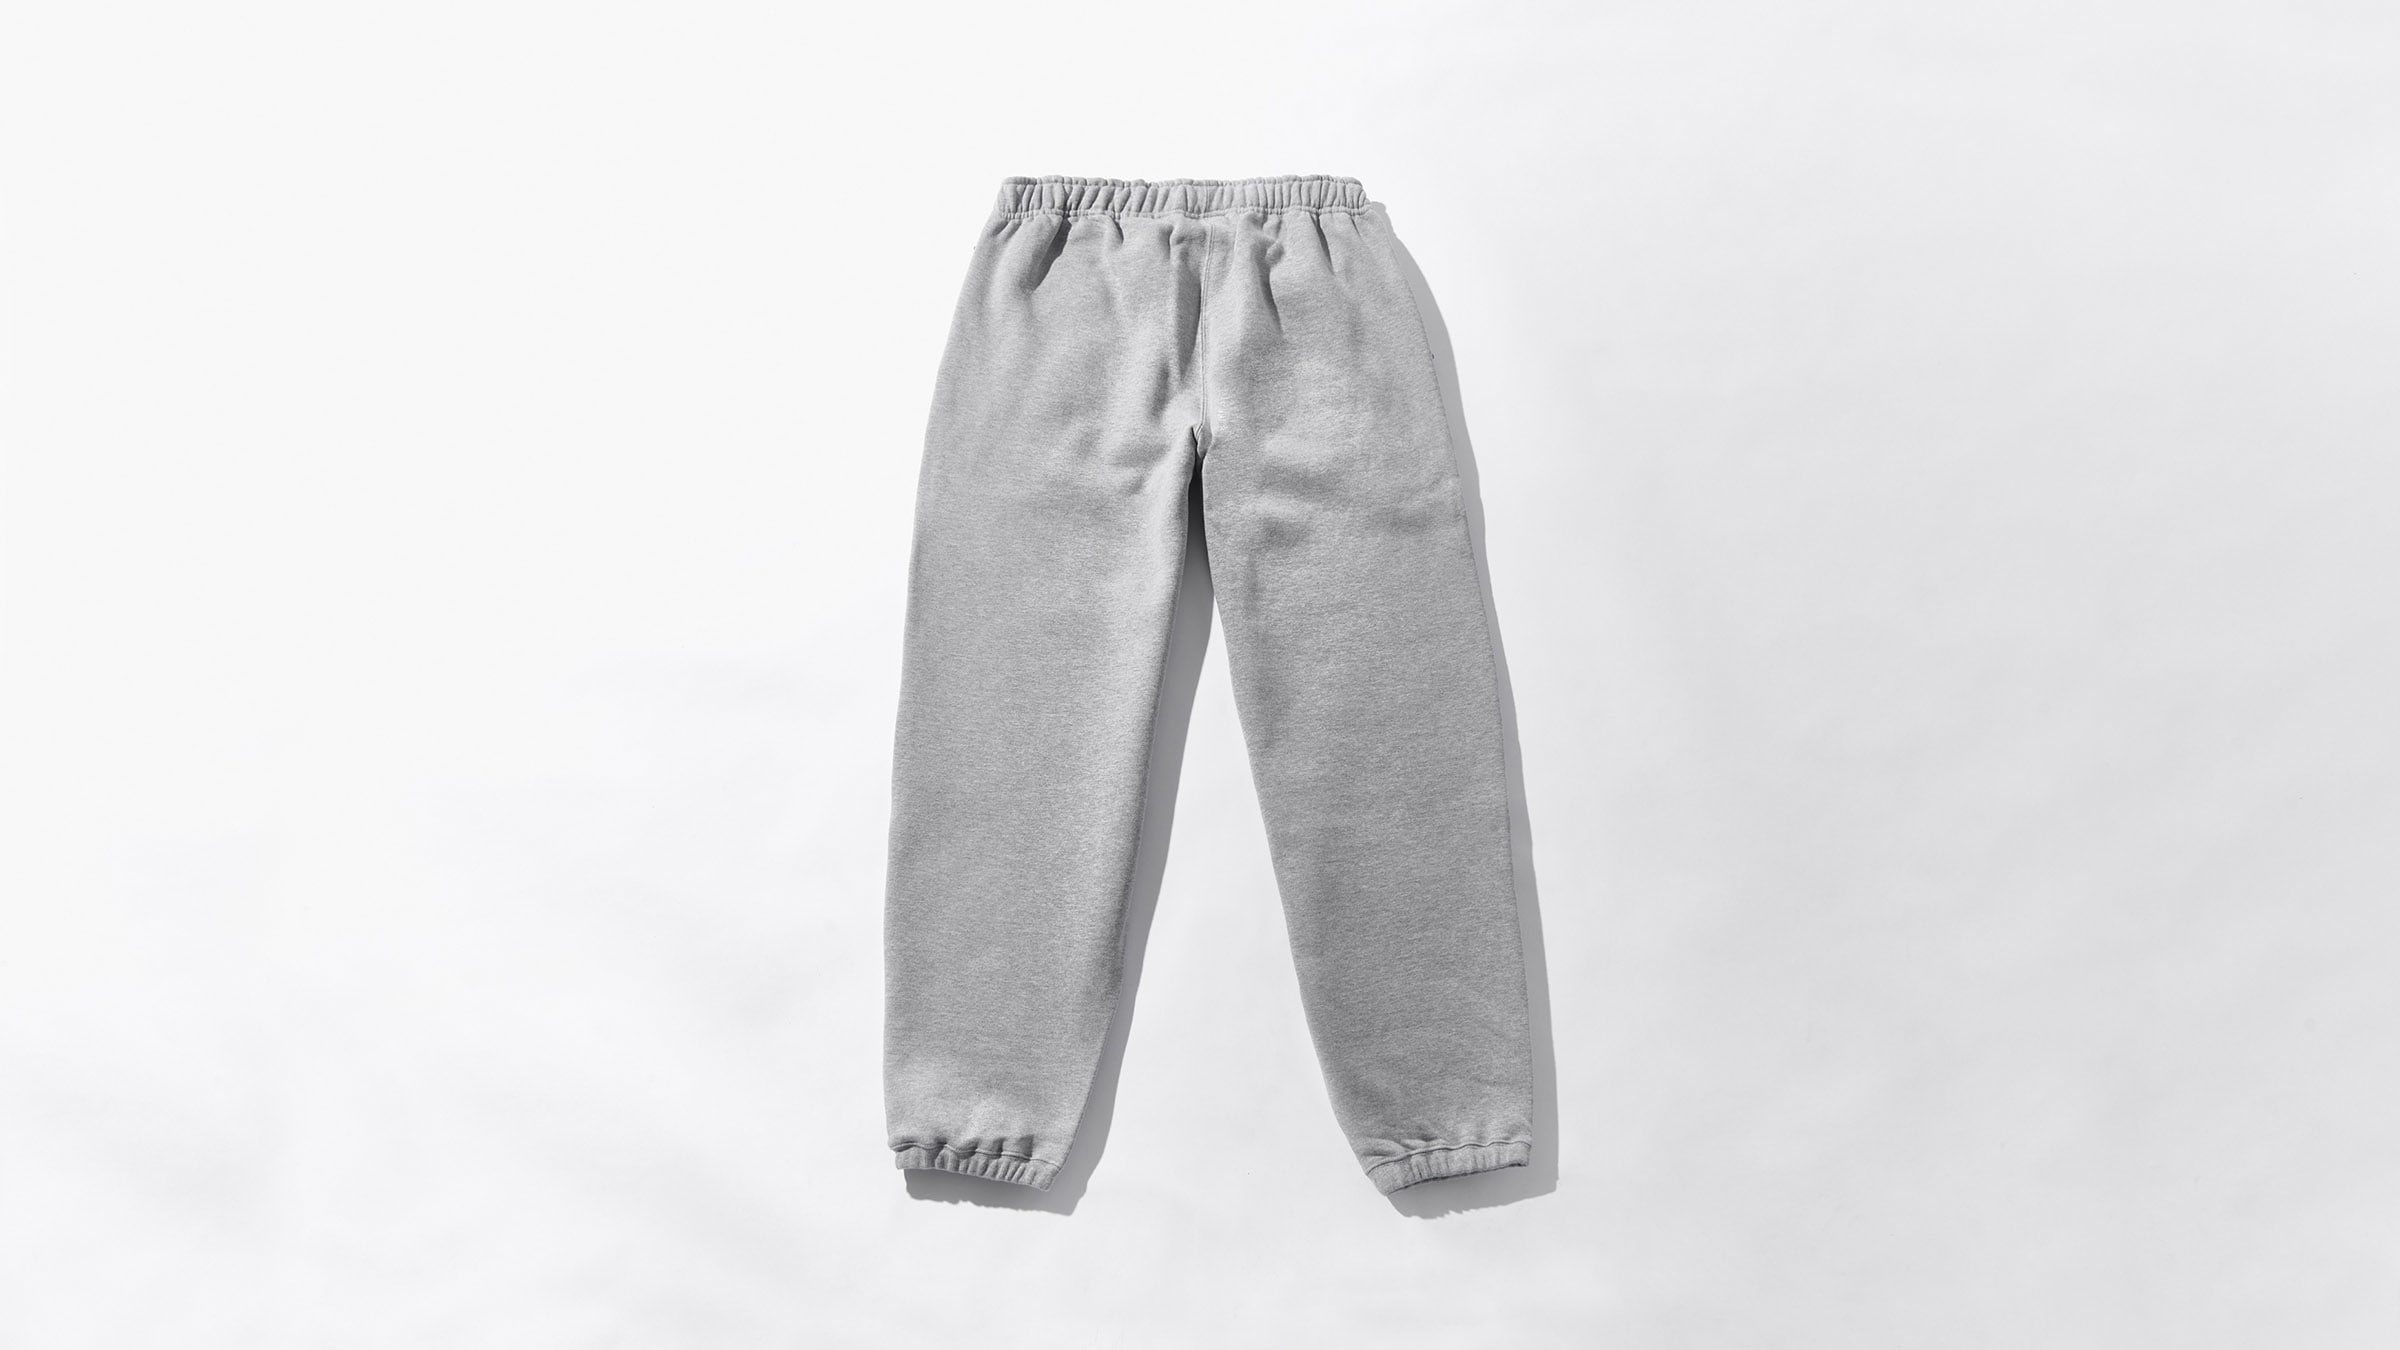 Nike x Stussy Sweat Pant (Grey) | END. Launches